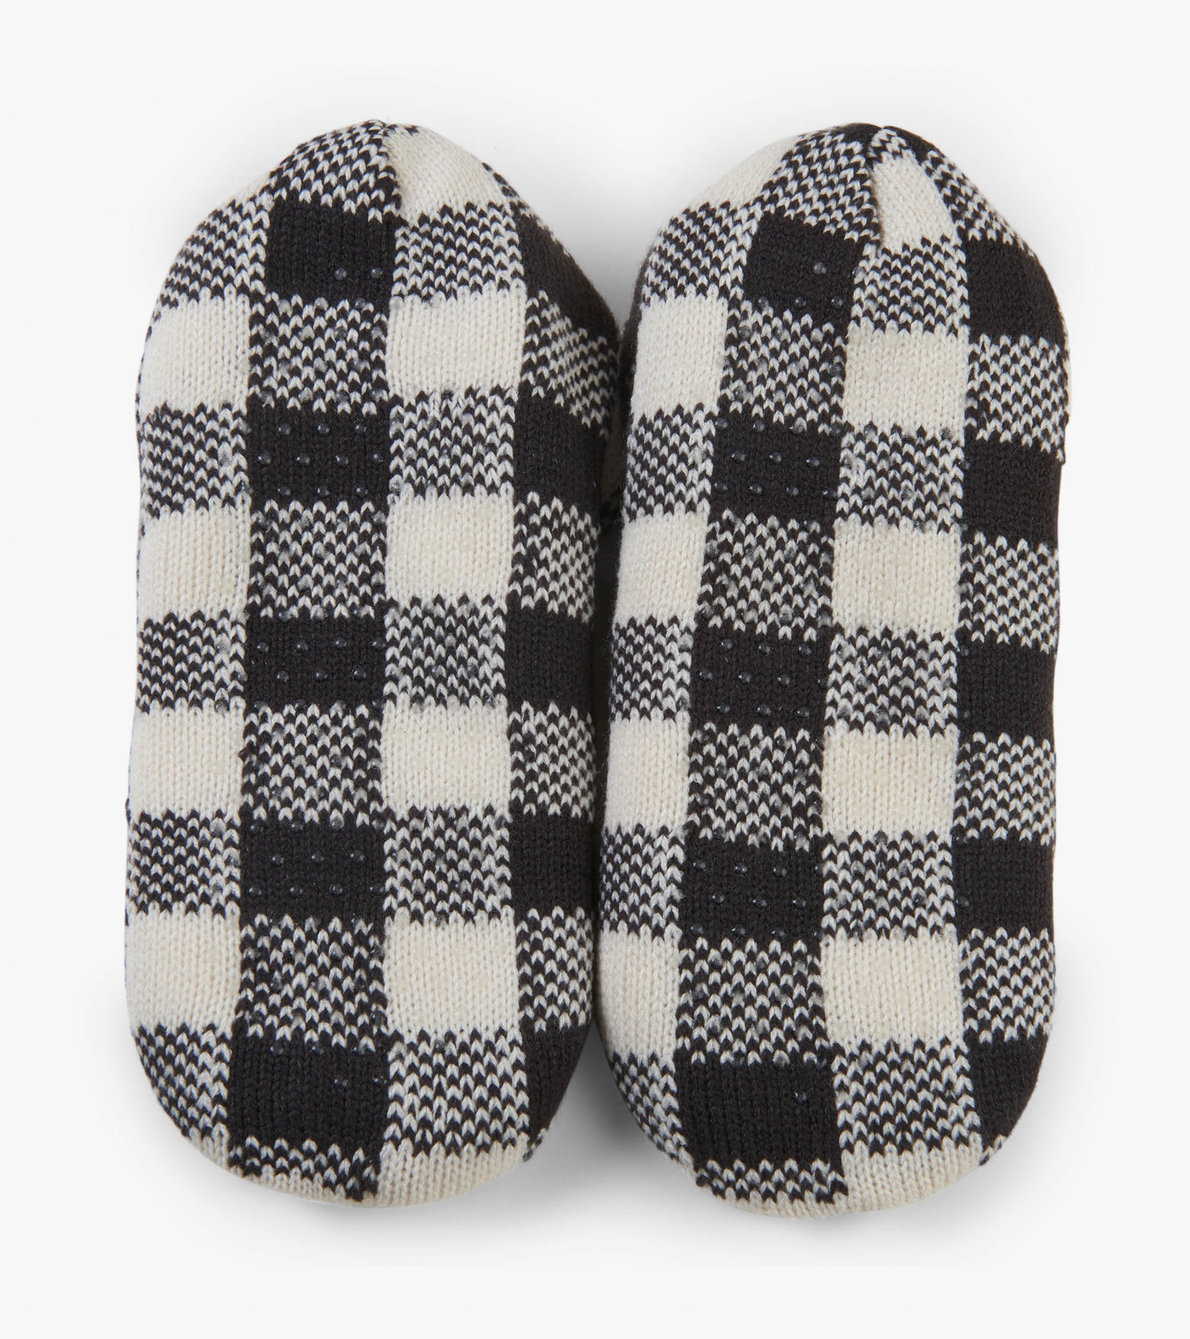 View larger image of Charcoal Plaid Women's Warm and Cozy Slippers